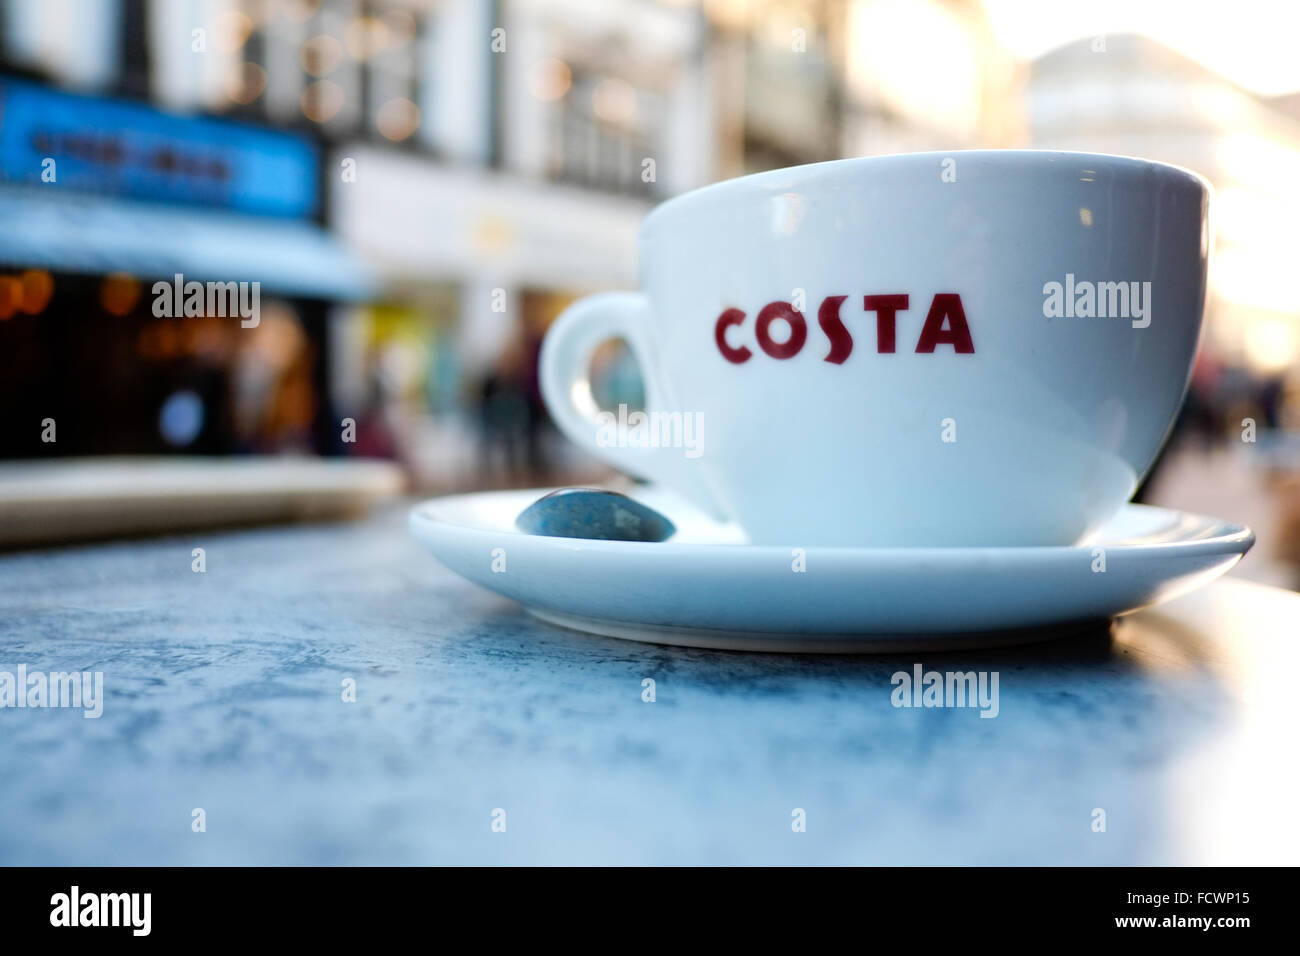 A costa coffee cup on an outside table clearly showing the costa logo on the cup Stock Photo